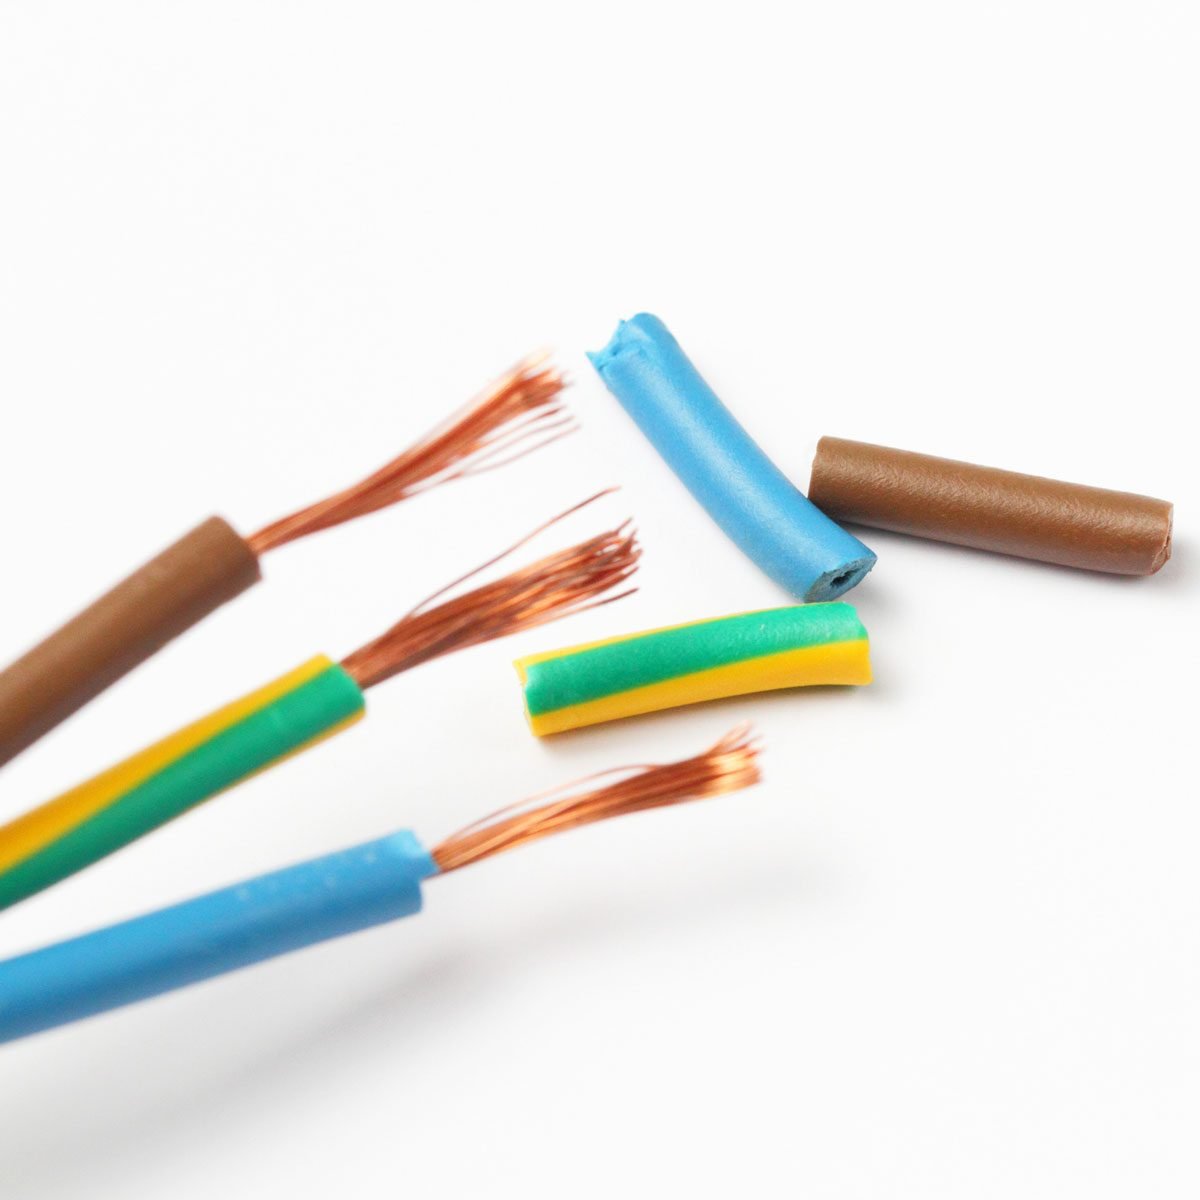 UNDERSTANDING THE COLOR CODES ON ELECTRICAL WIRES — RSB Electrical Inc.